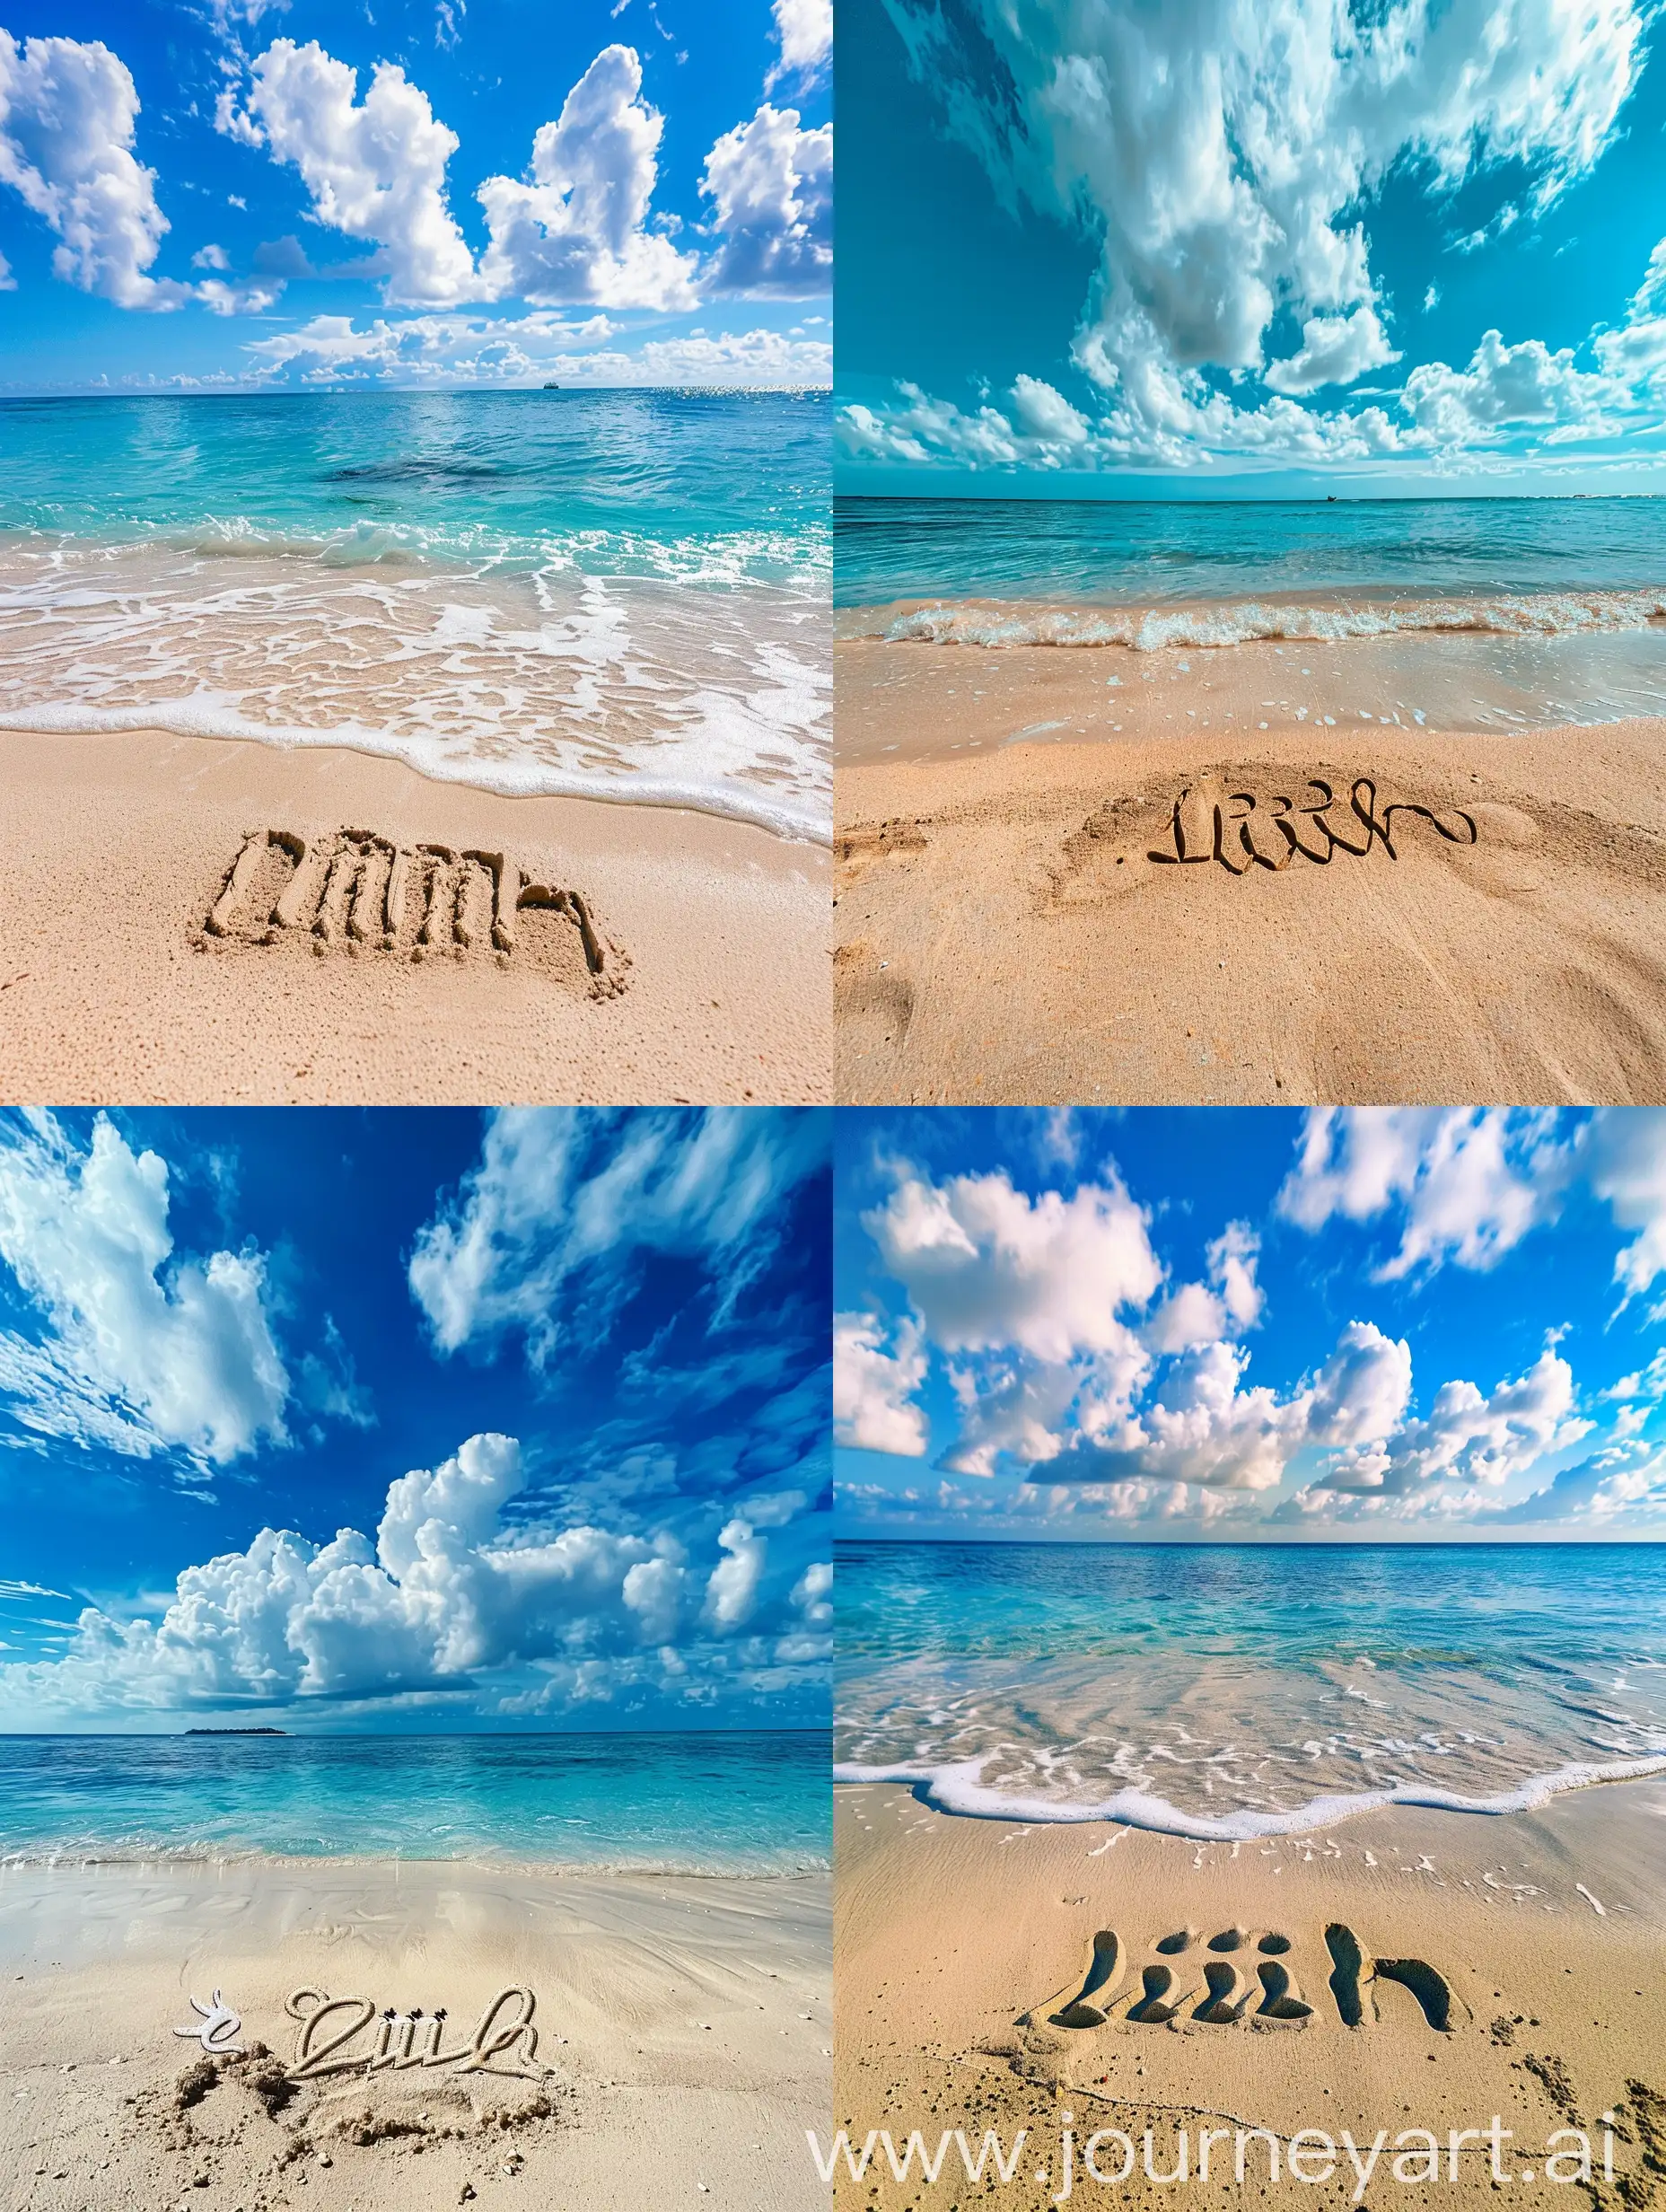 beautiful beach sand, blue sea and blue and white clouds during the day on the beach sand, the name "lilih" is written in clear, natural HD